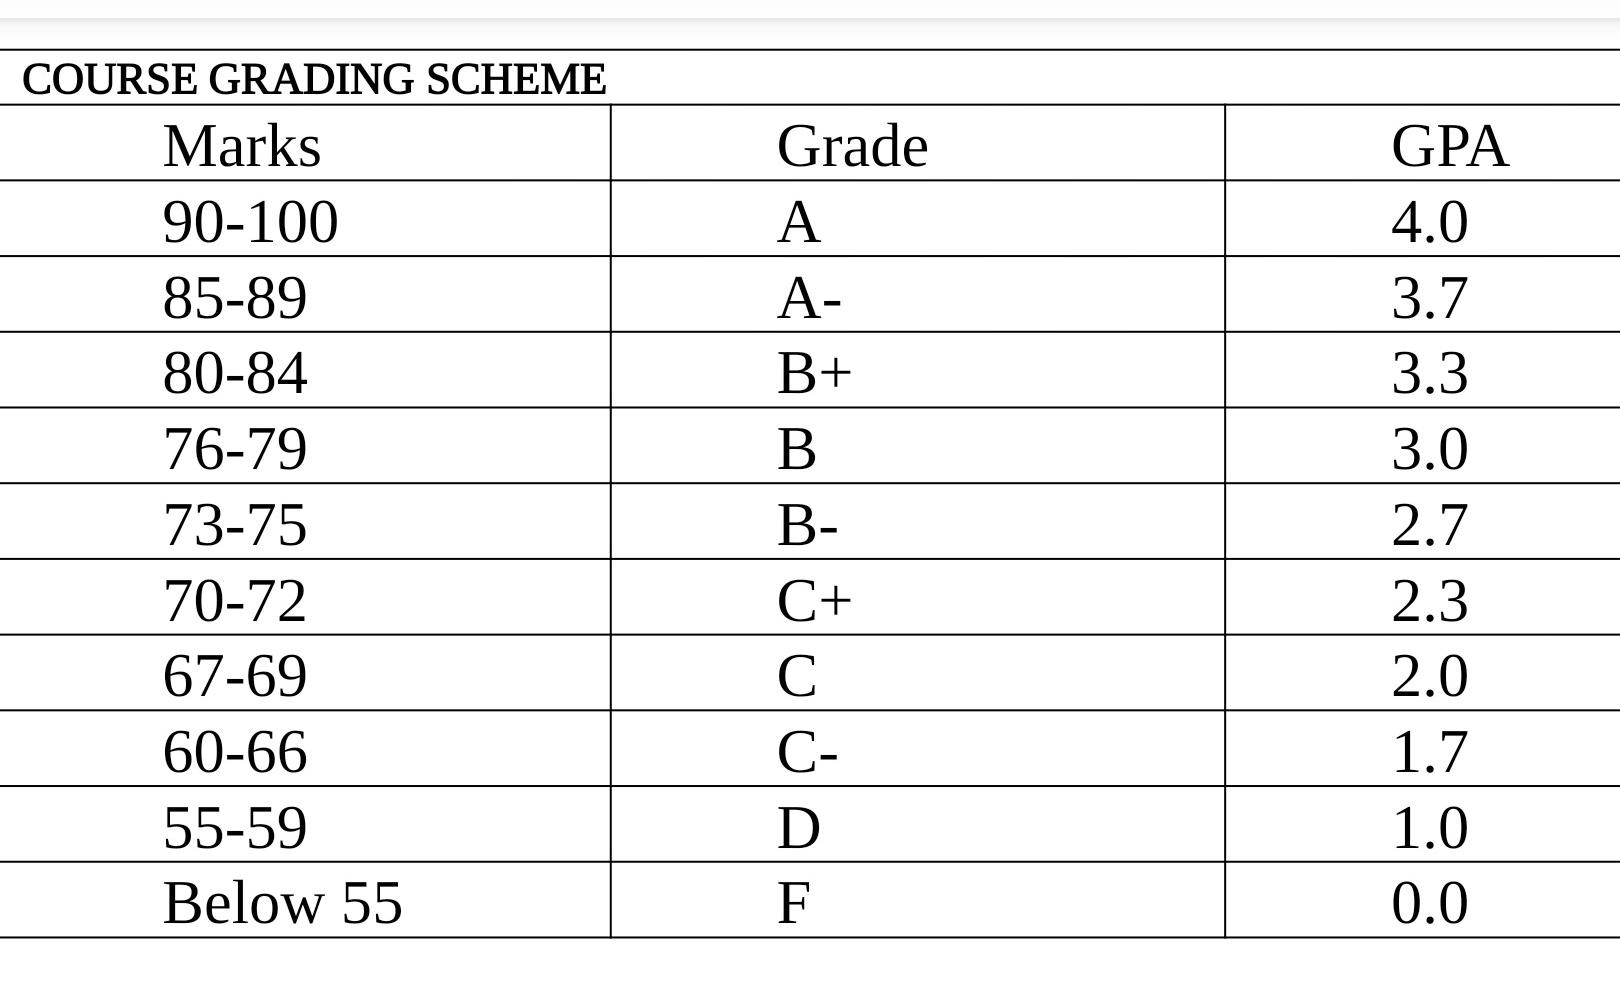 1.0 GPA is equivalent to 65-66% or D grade.